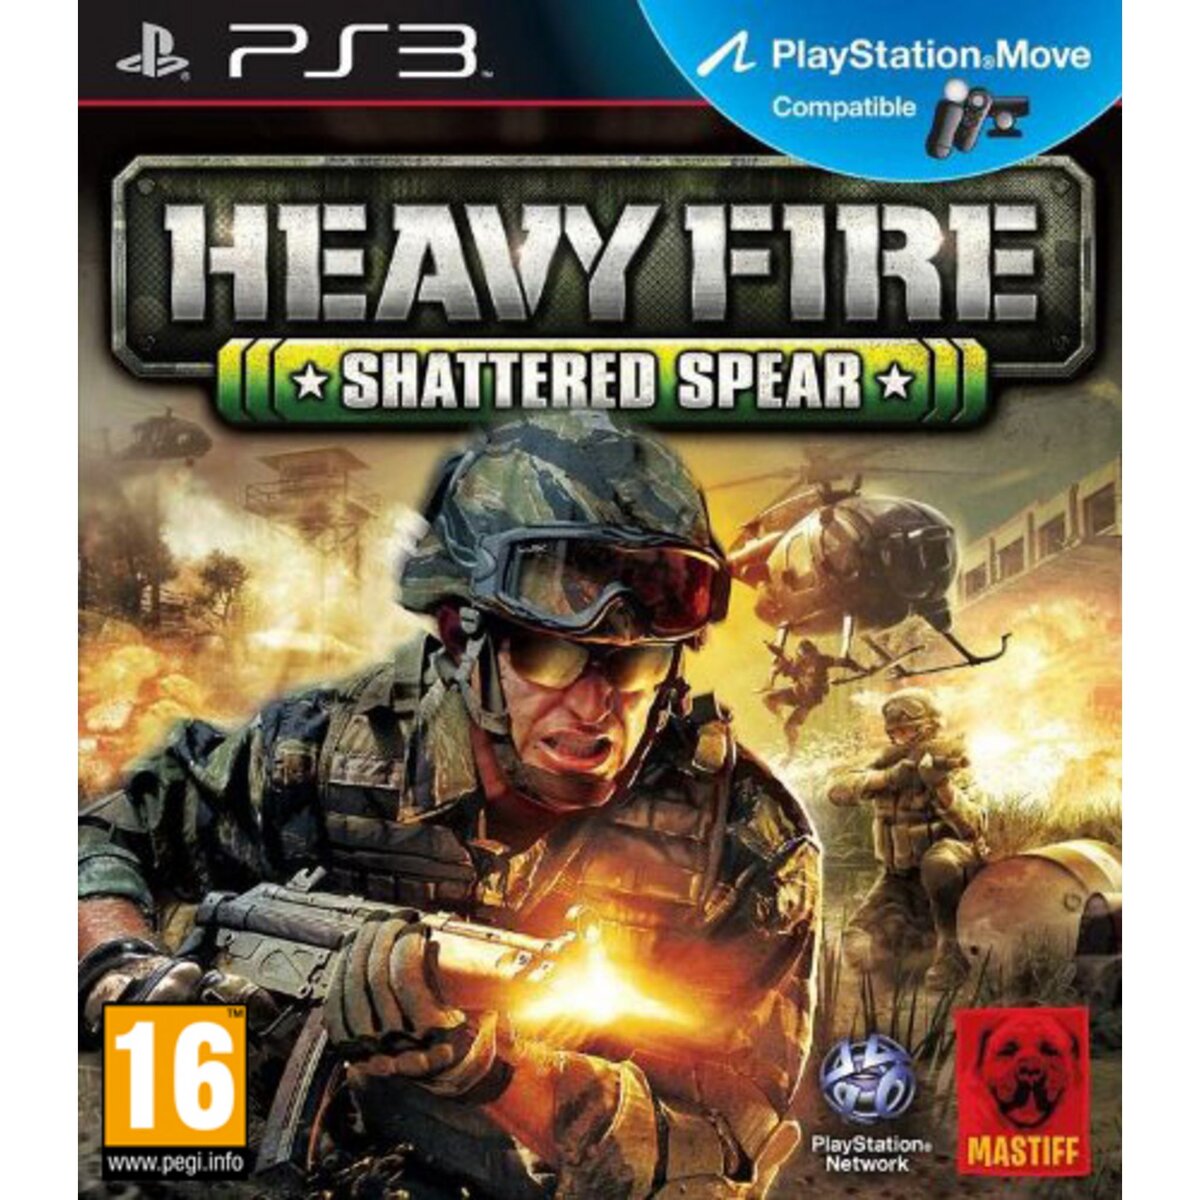 Heavy Fire - Shattered Spear PS3